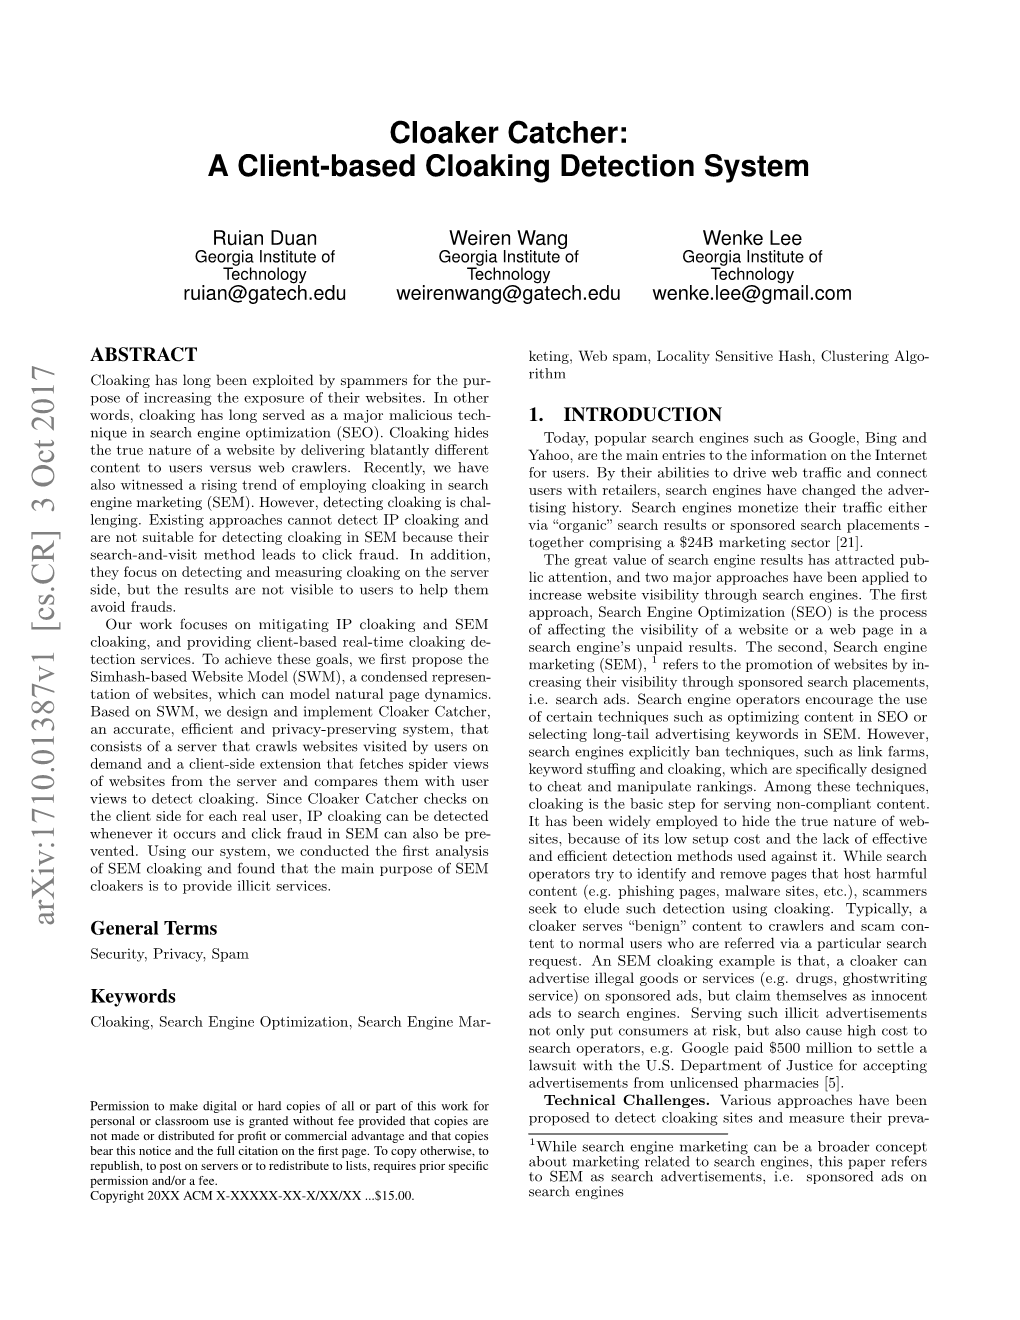 Cloaker Catcher: a Client-Based Cloaking Detection System